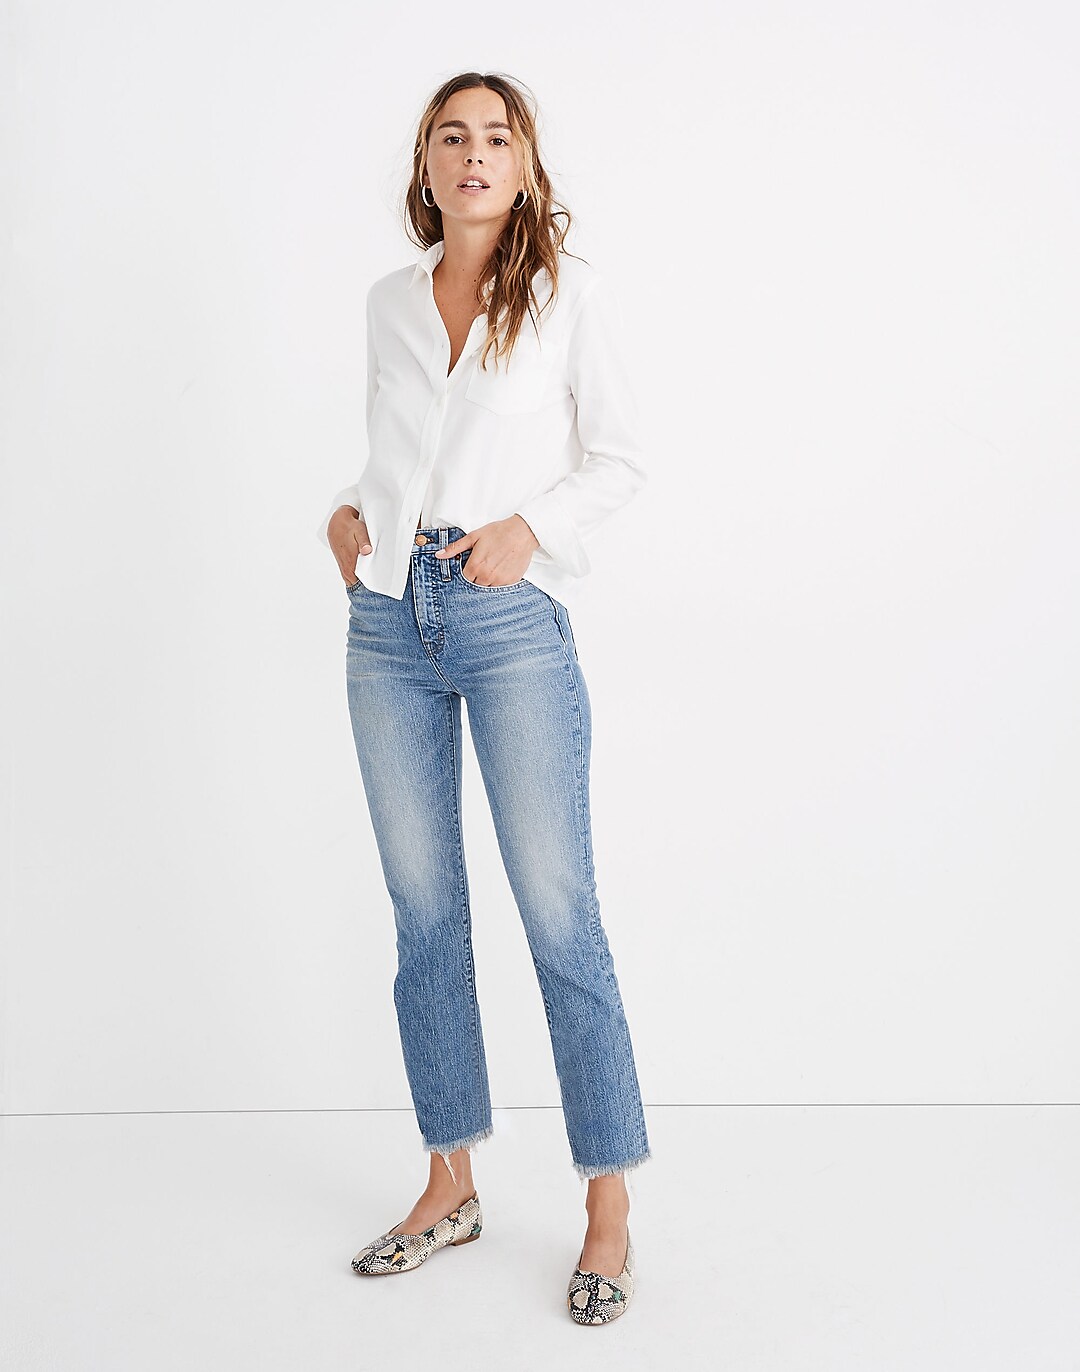 Women's Perfect Vintage Jean in Ainsworth Wash